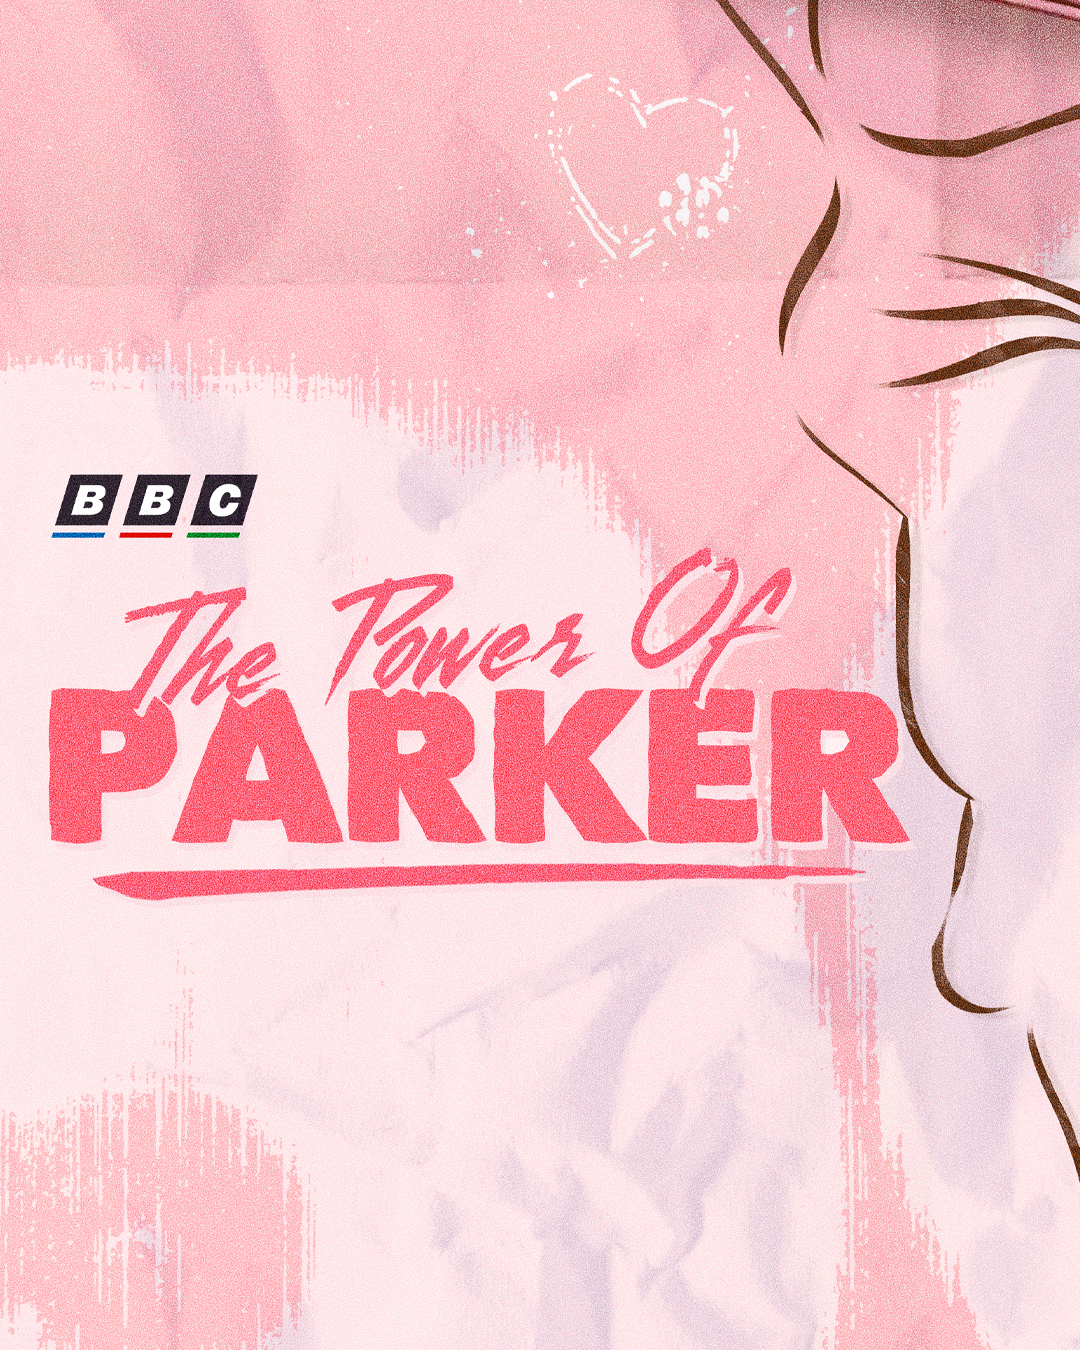 The Power of Parker (BBC) – Private Commission